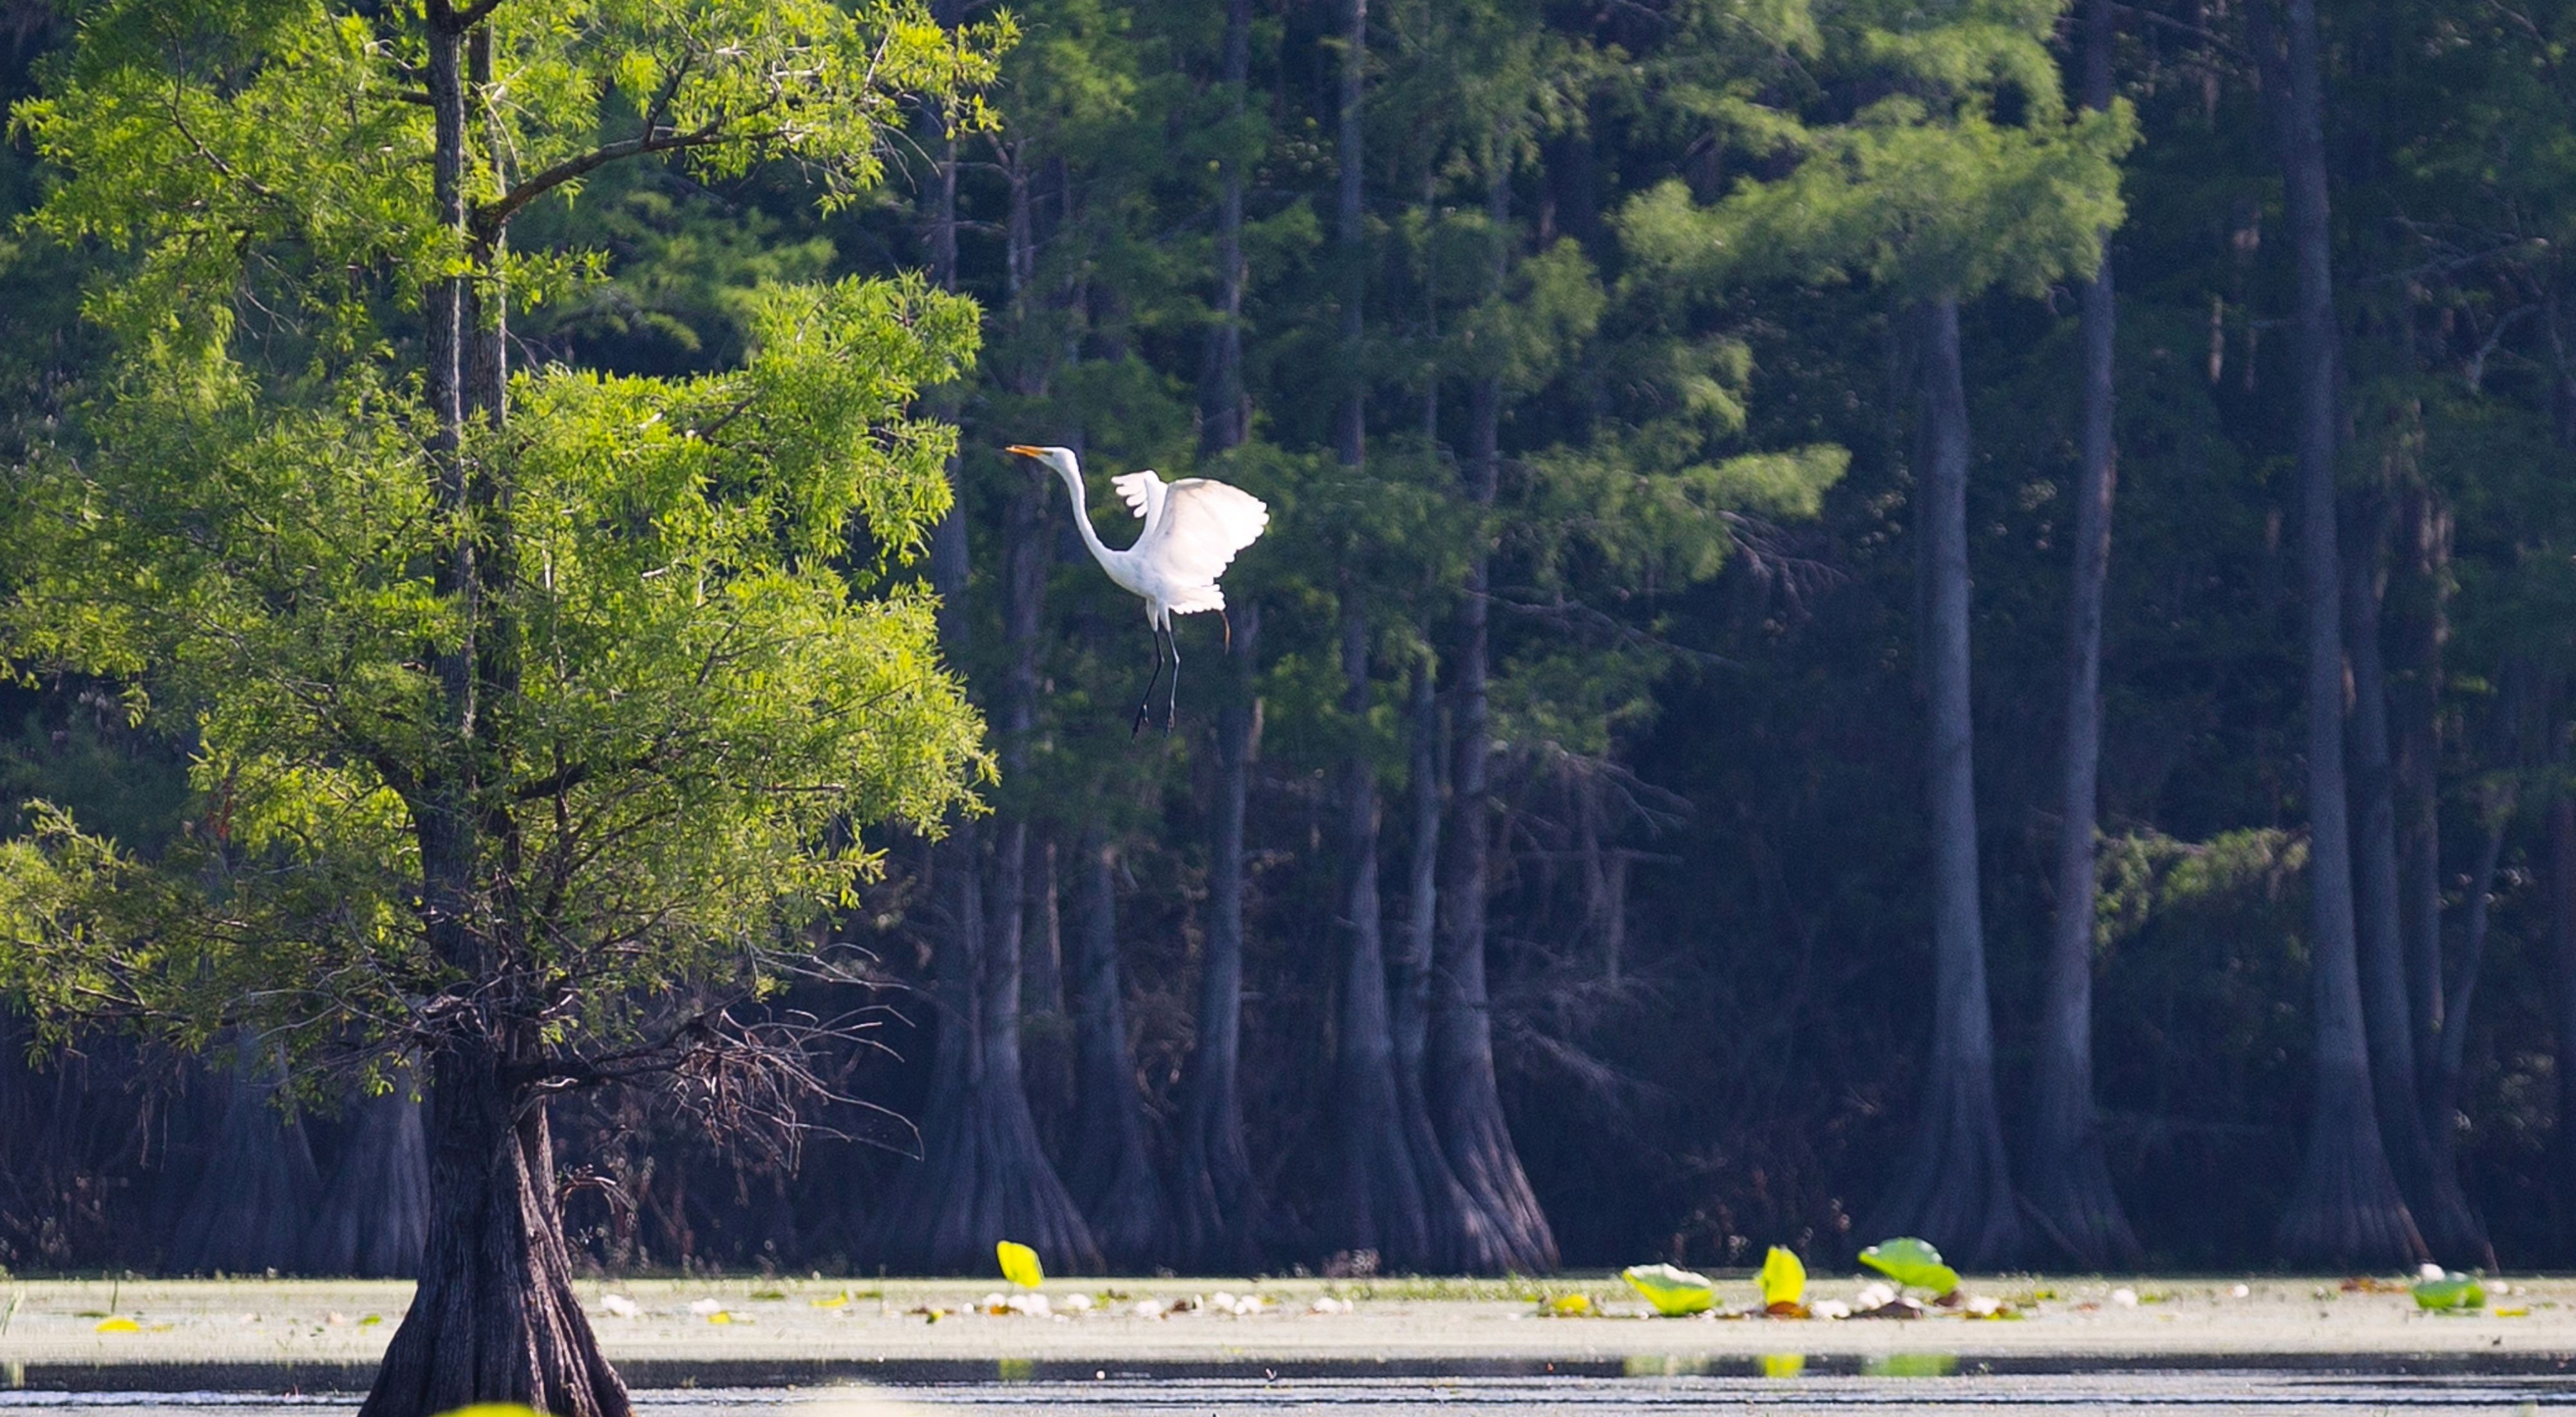 A white bird flys over a lake with dense cypress trees in and around its waters.